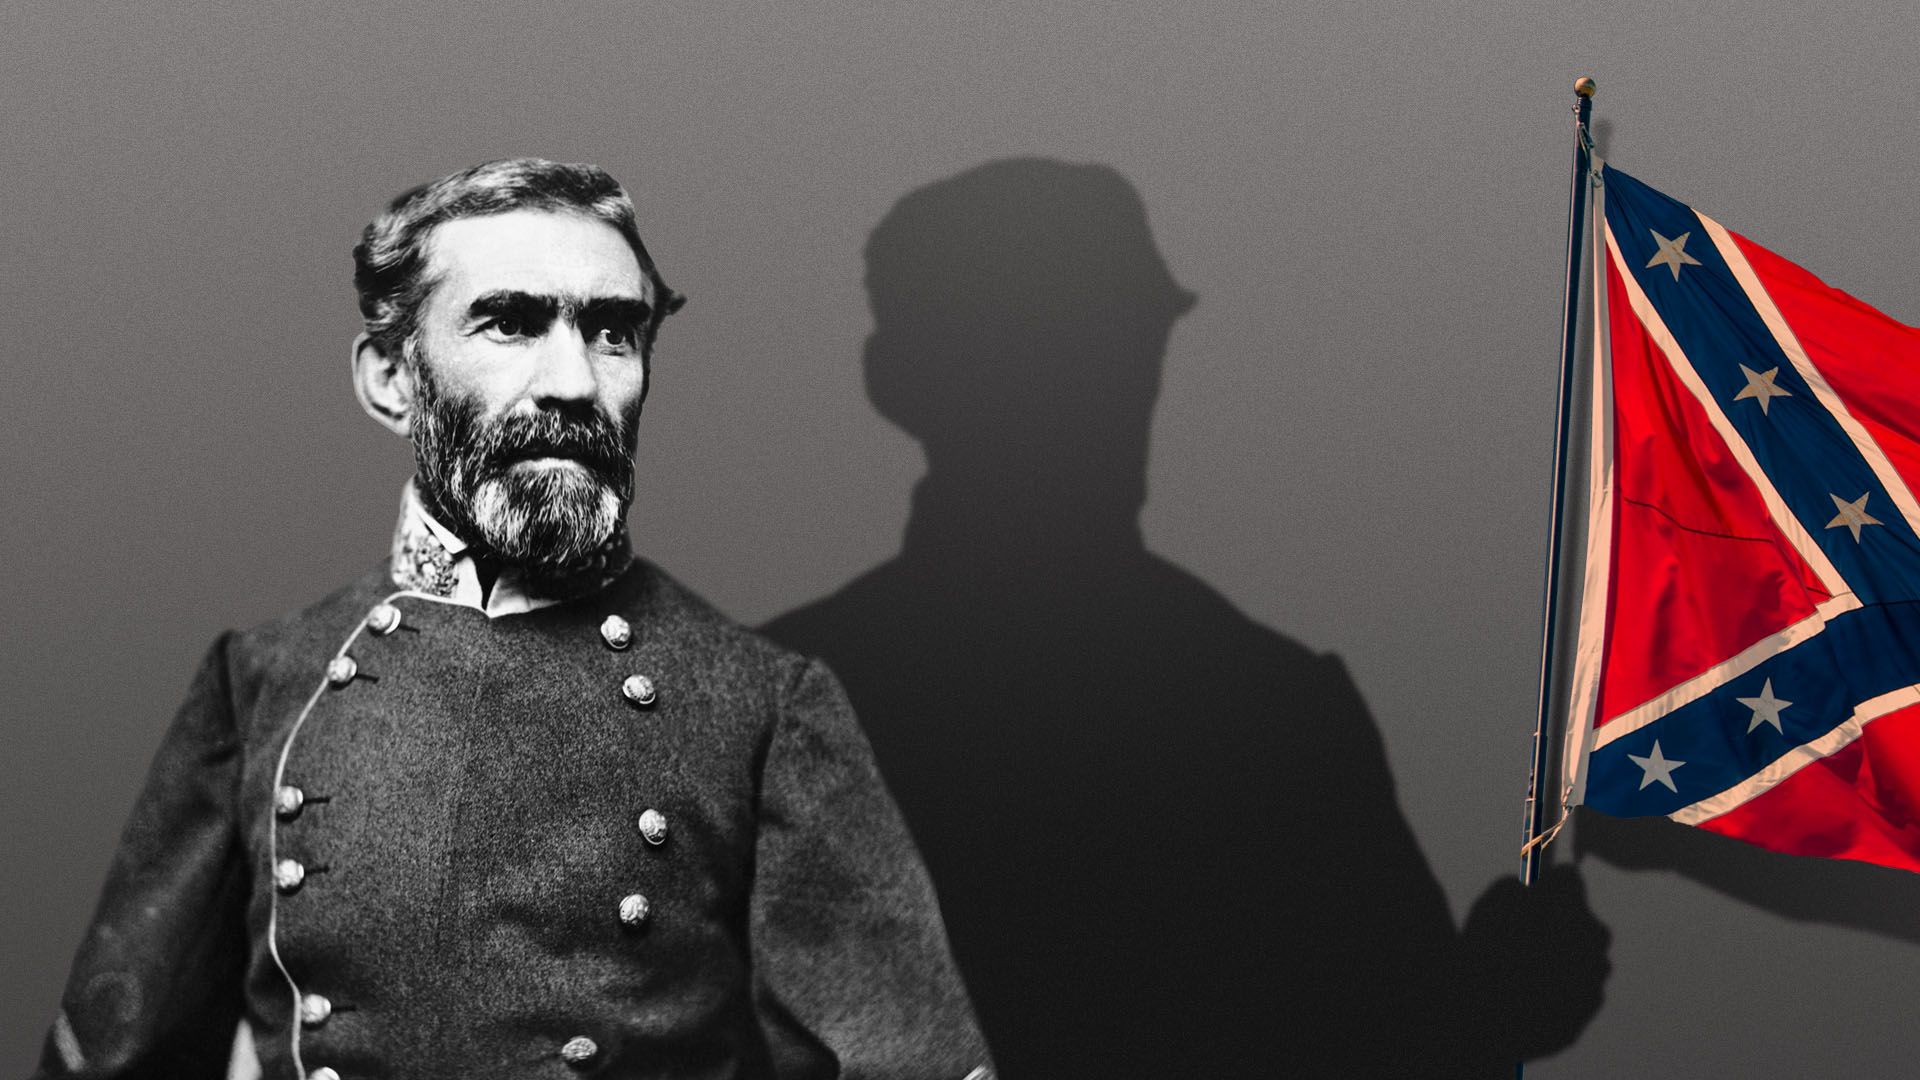 Photo illustration of Confederate General Braxton Bragg casting a shadow holding a Confederate flag.